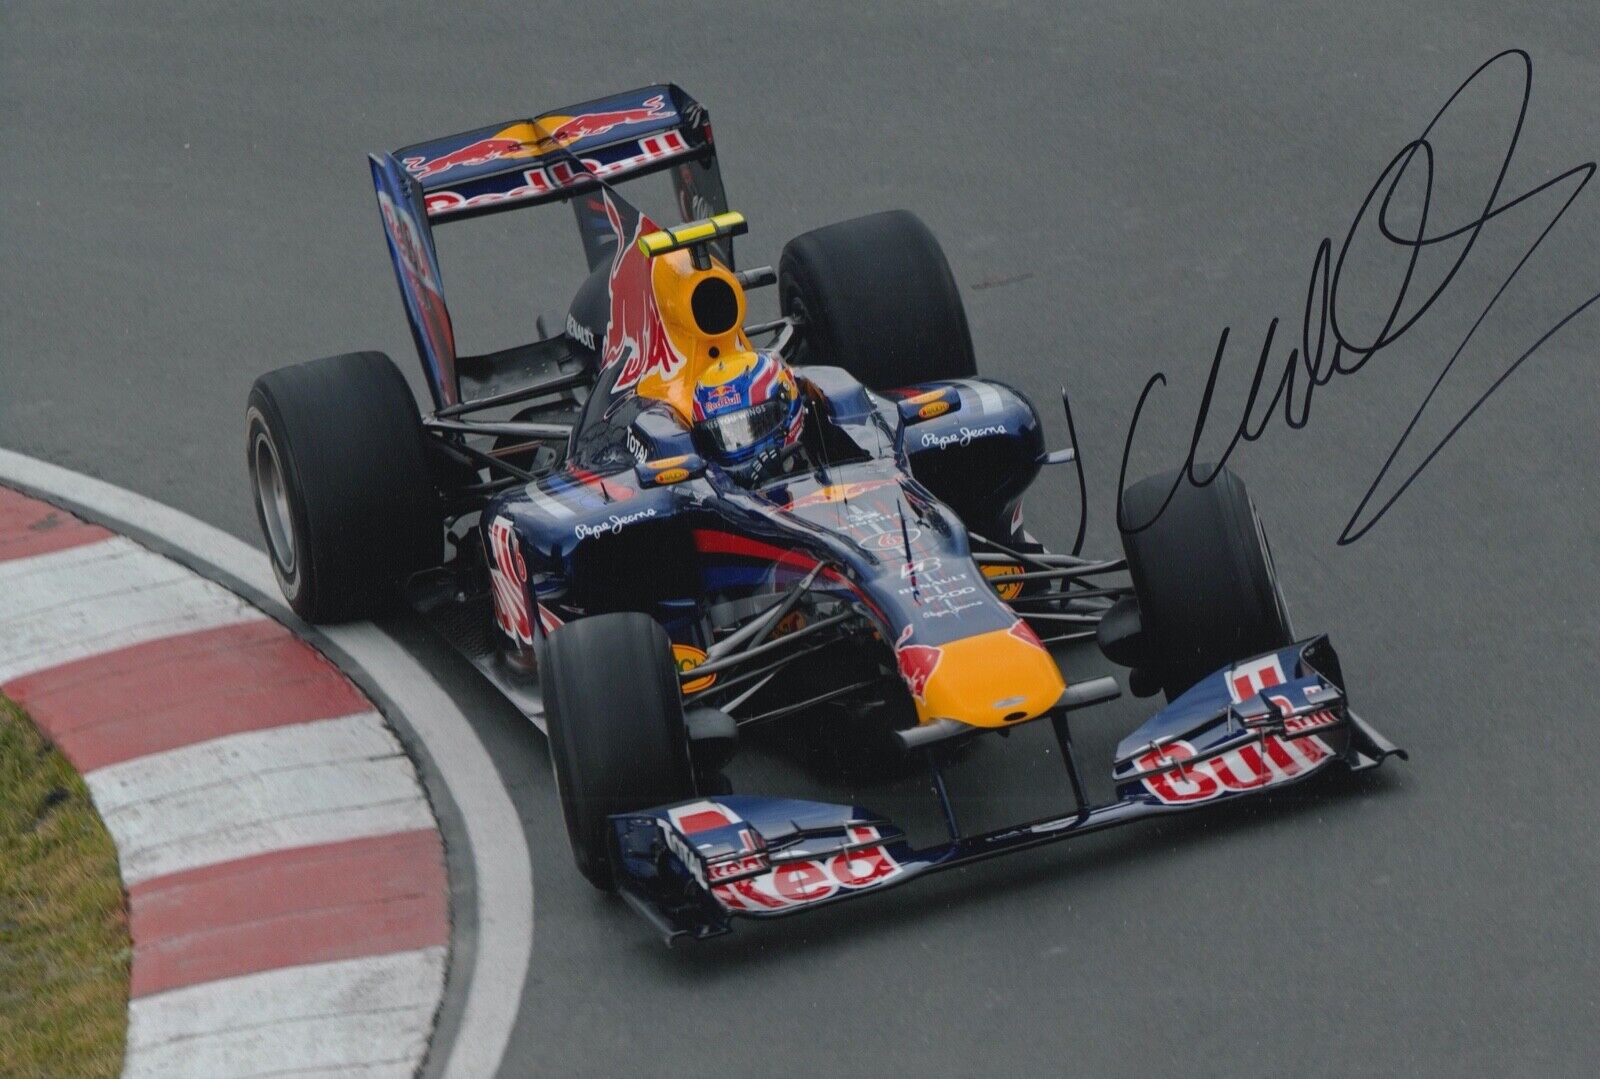 Mark Webber Hand Signed 12x8 Photo Poster painting F1 Autograph Red Bull Racing 7